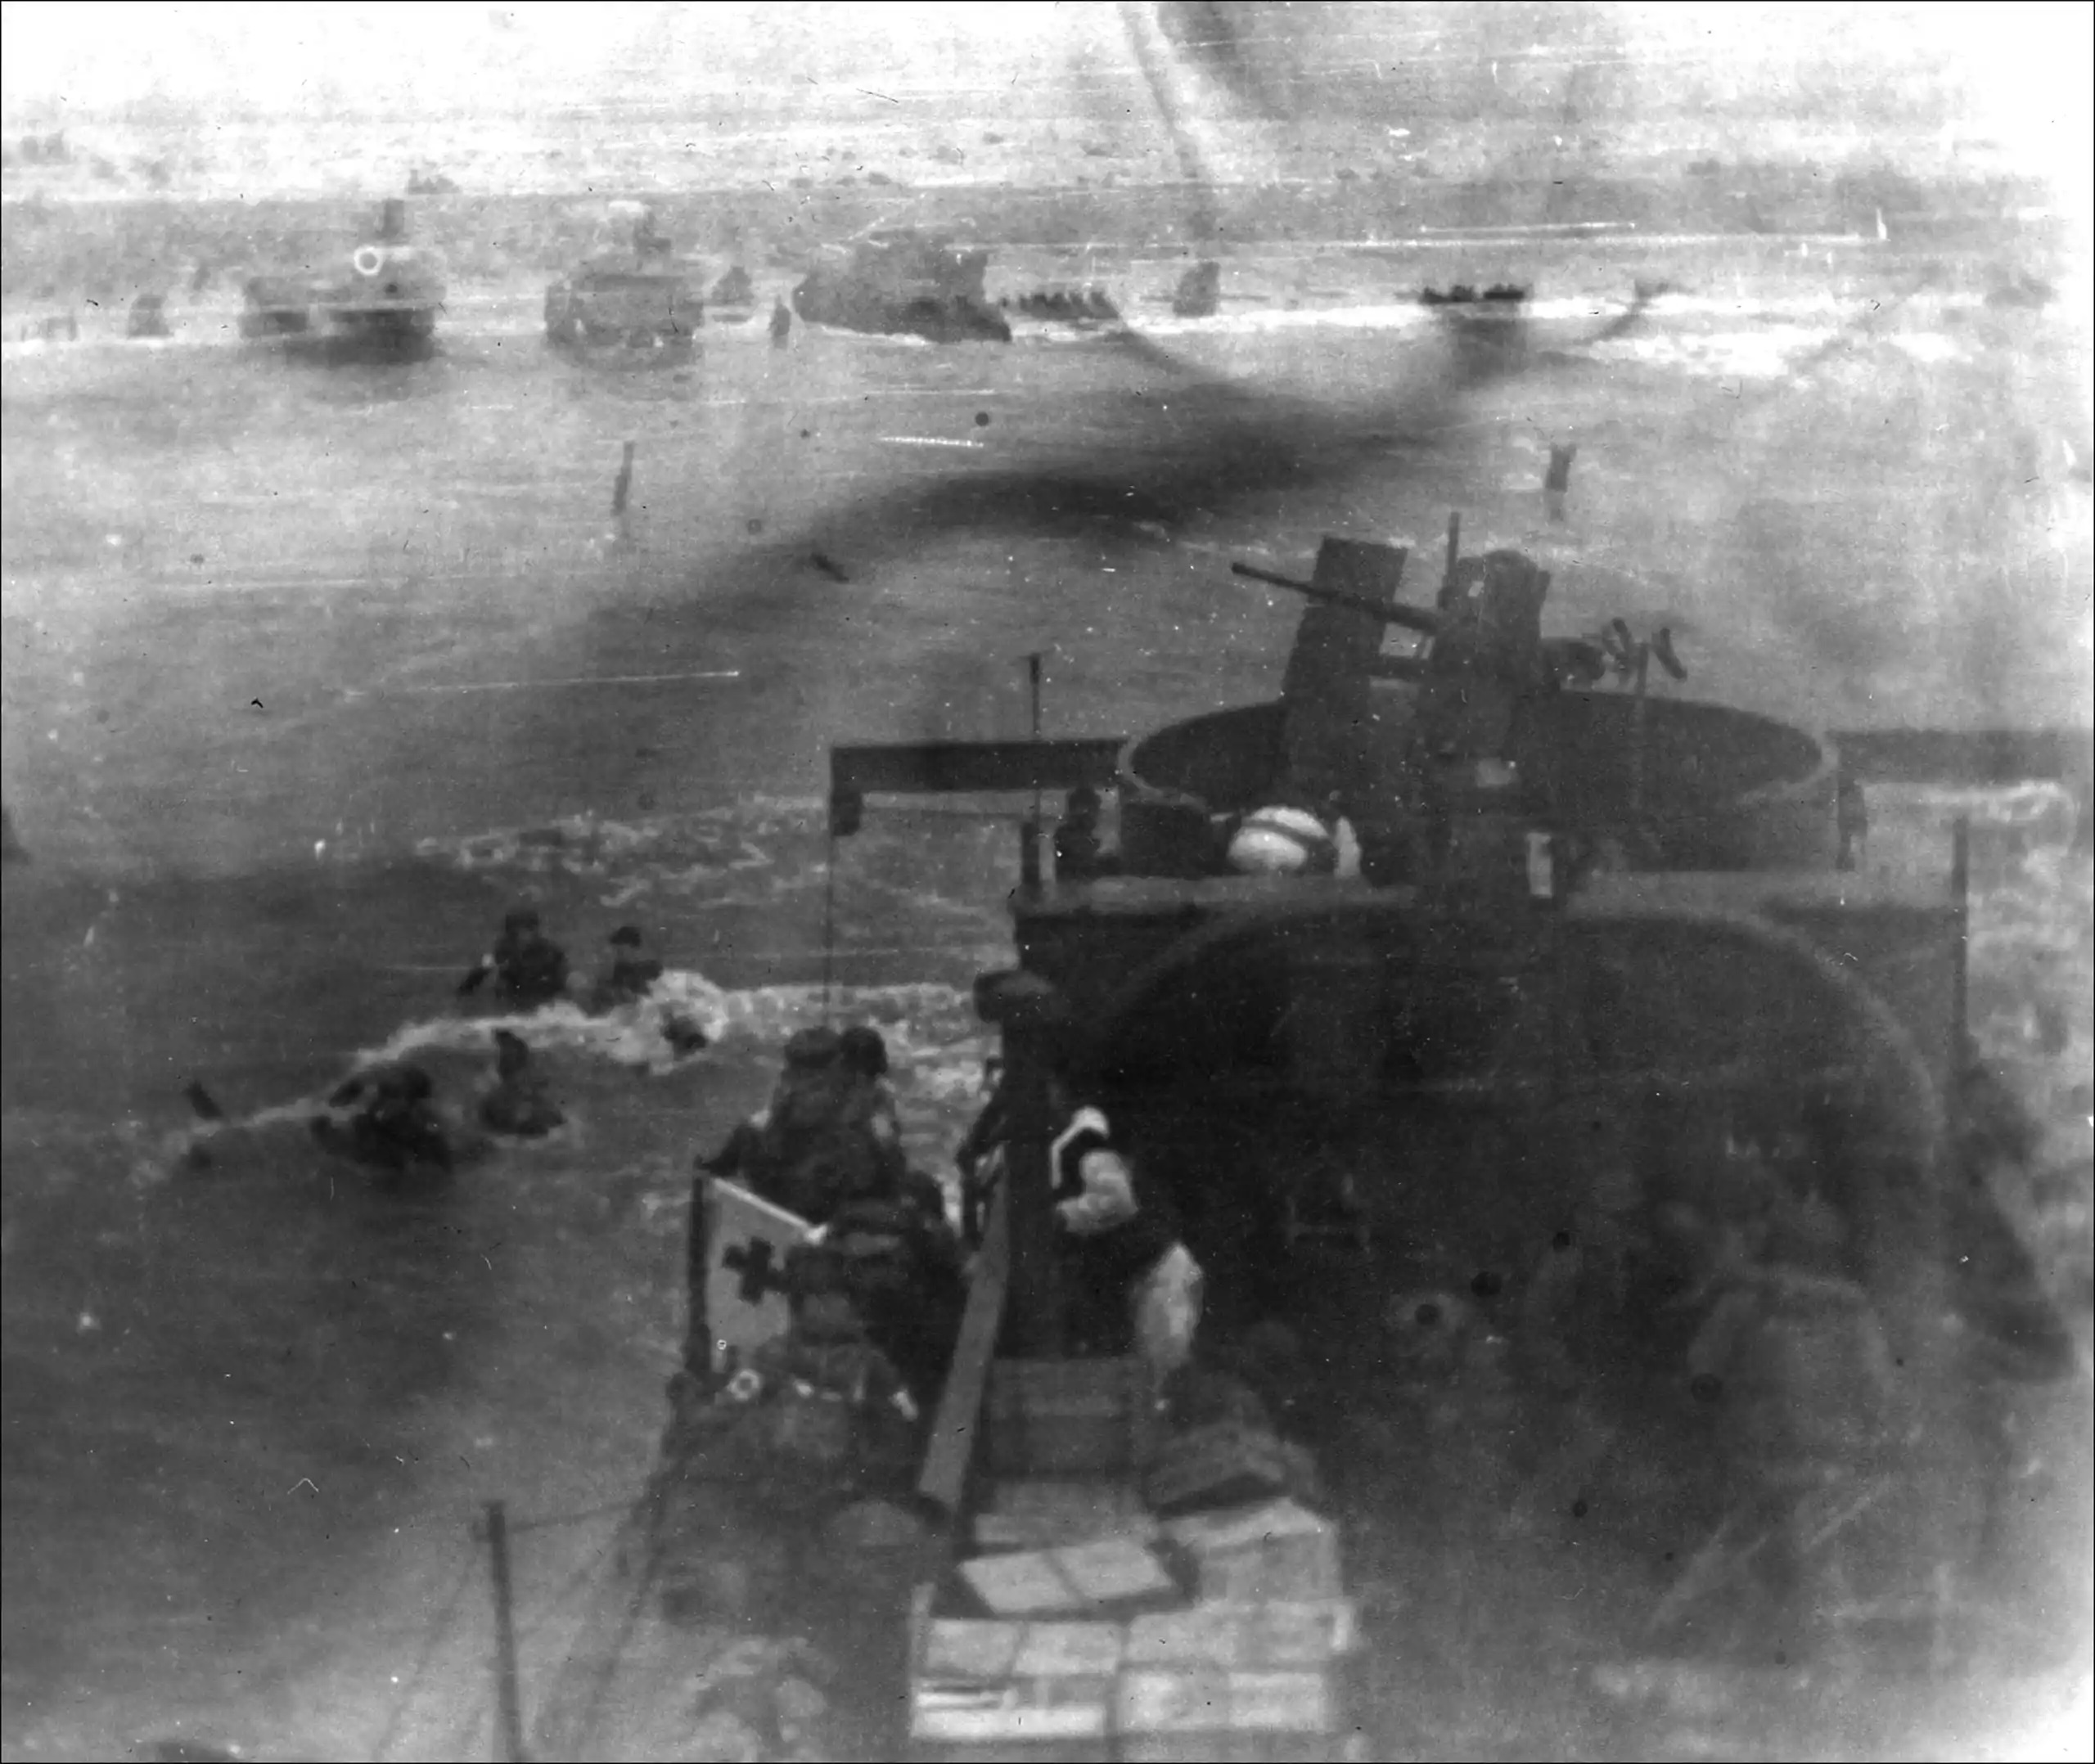 9.	Rare image of LCI-94 approaching the beaches to disembark troops on D-Day. (National World War II Museum)